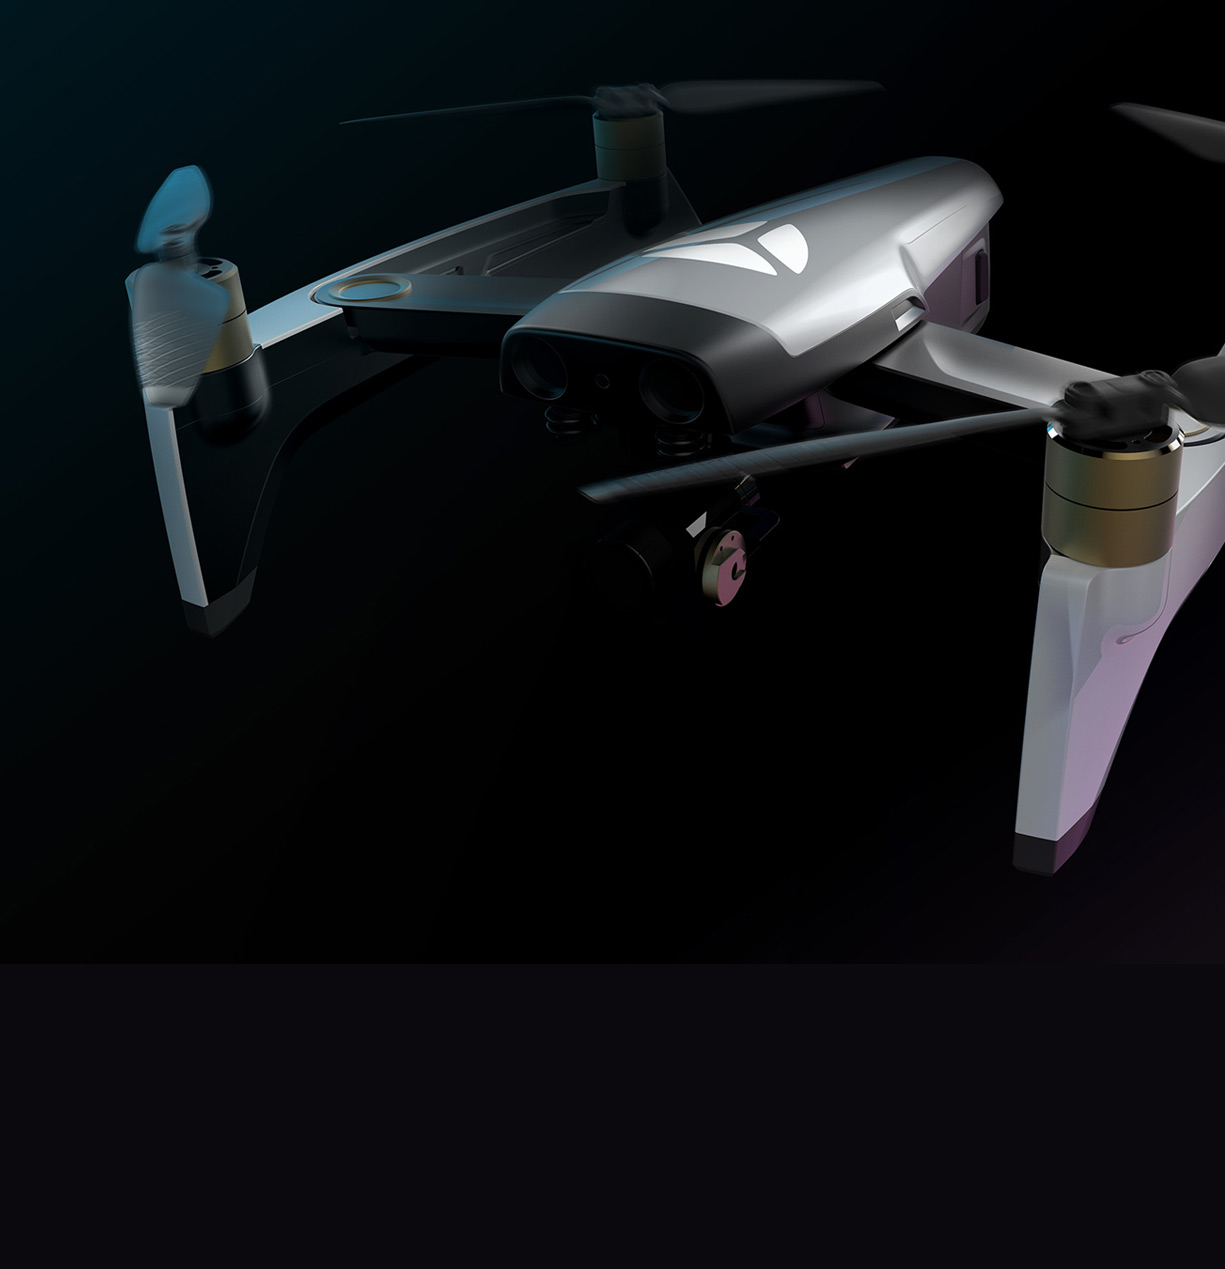 yuneec drone from the front